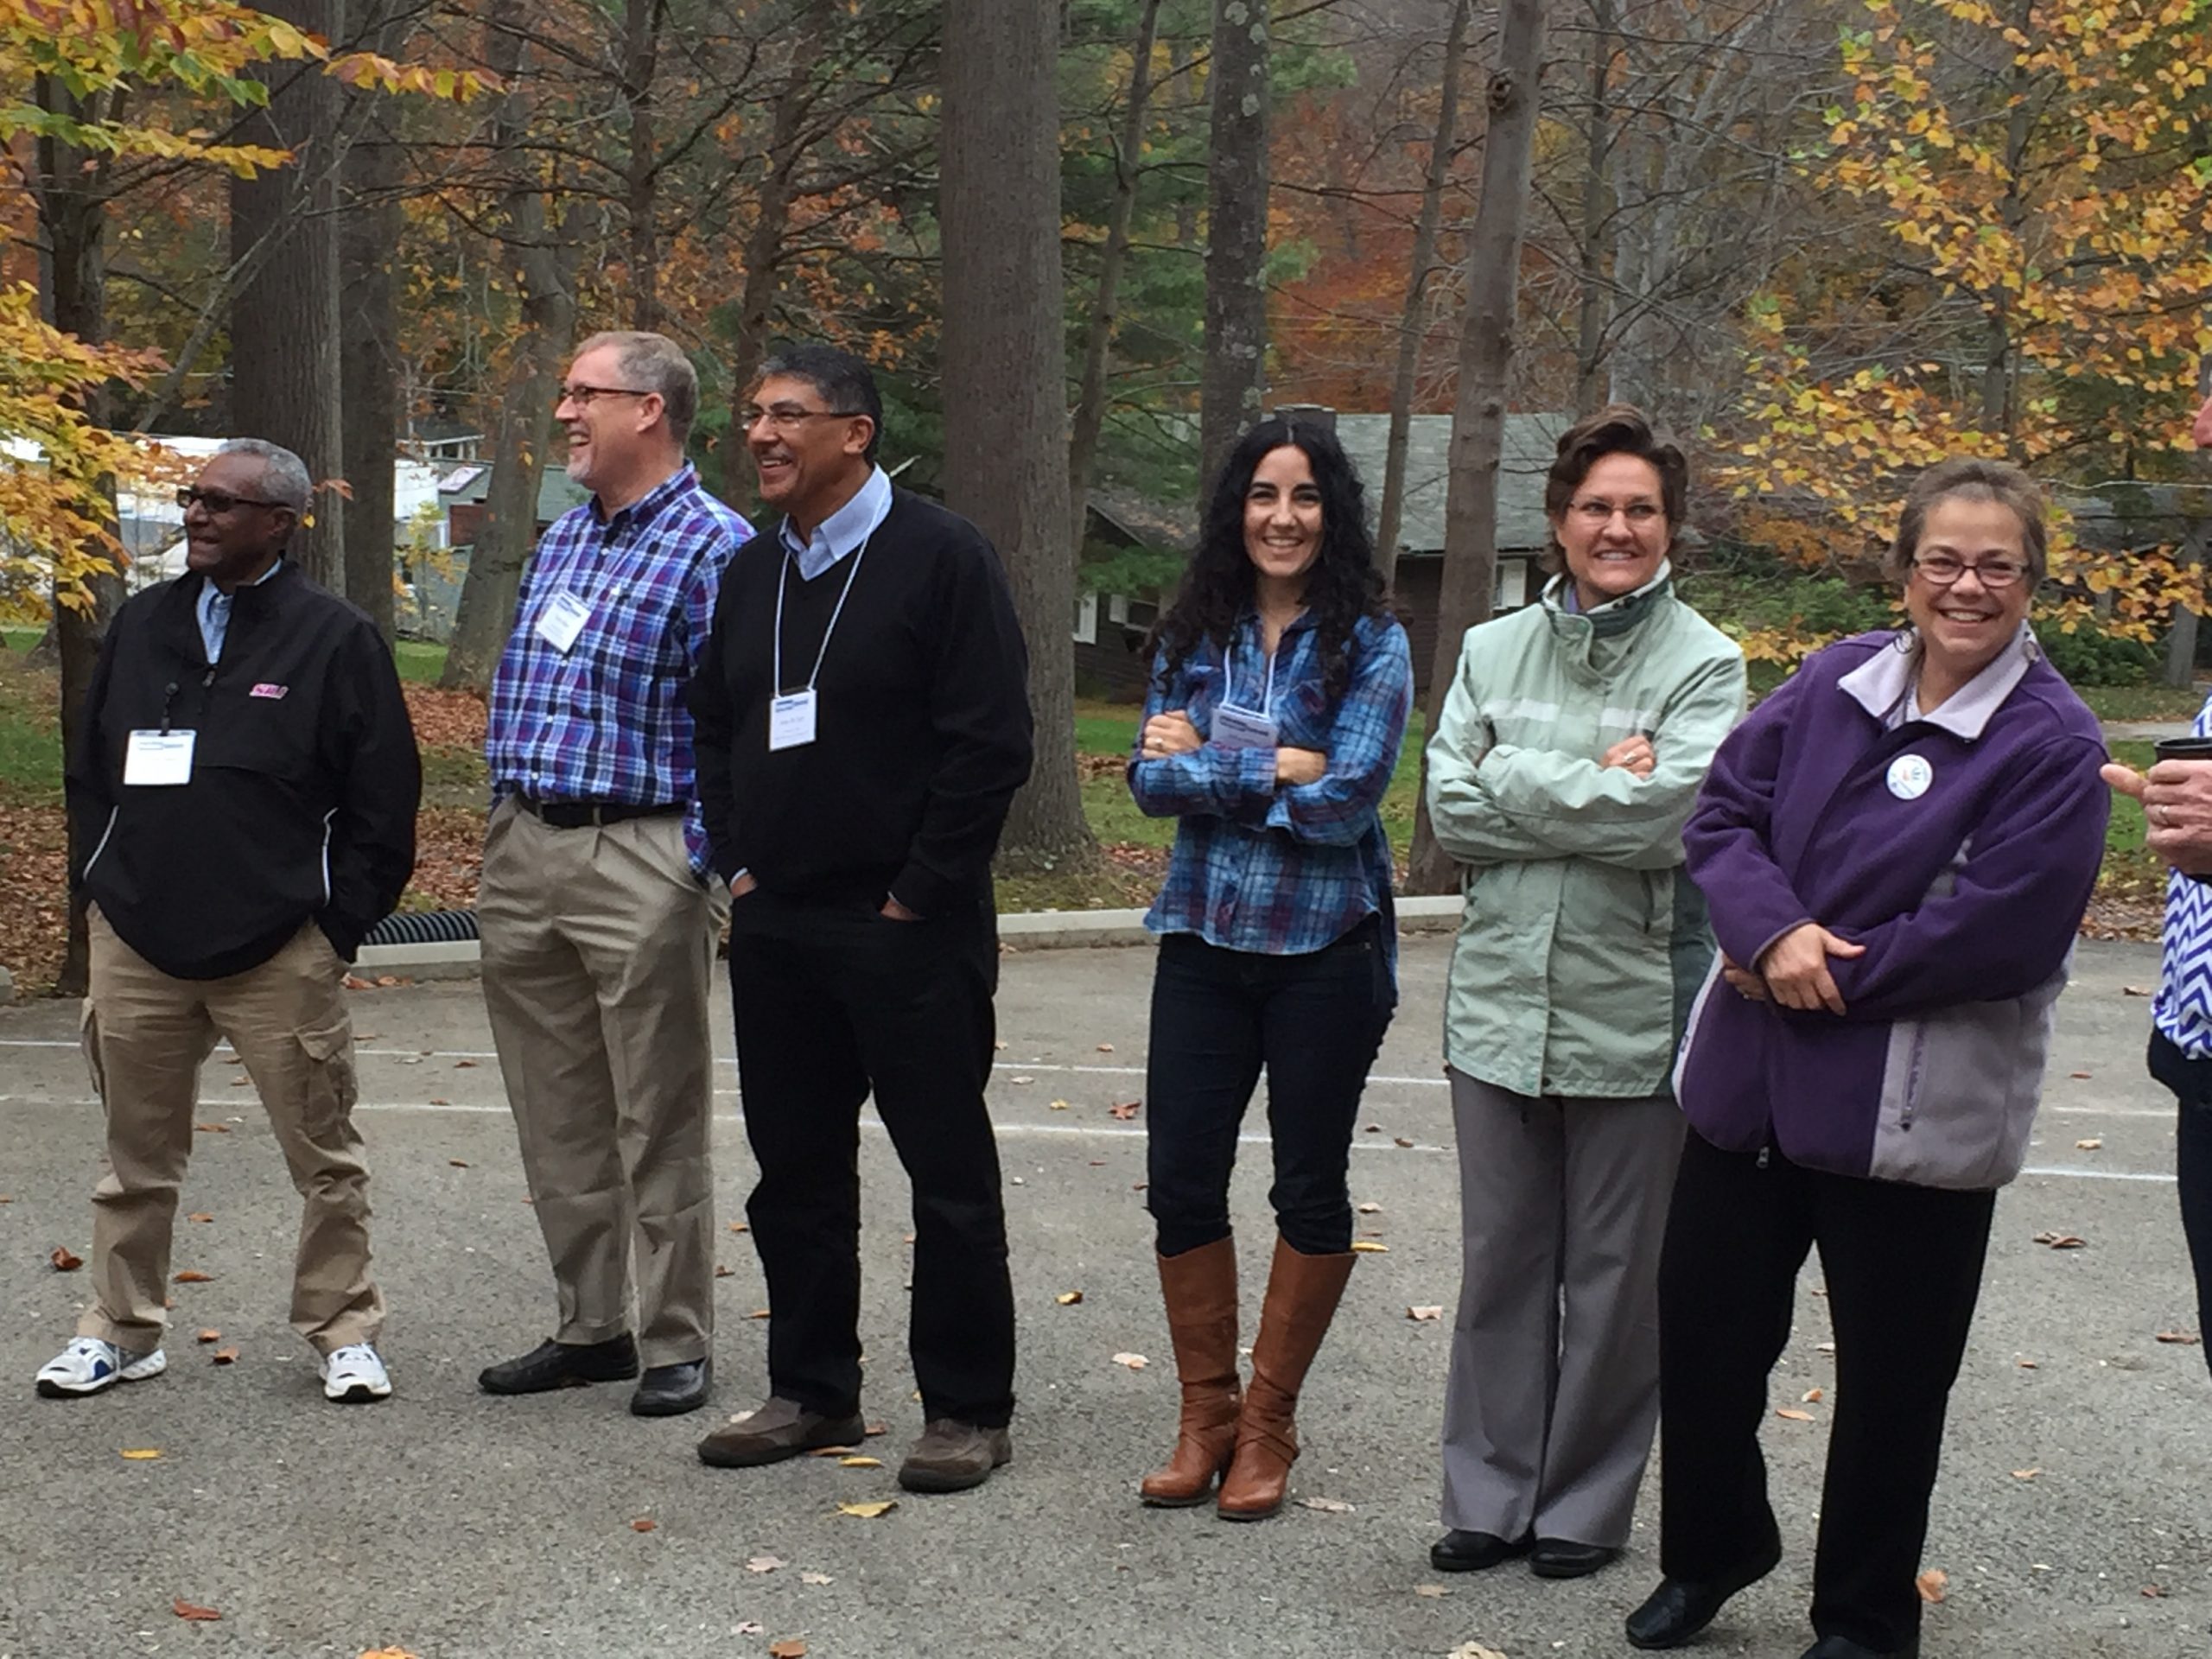 An outdoor activity helps participants learn about commonalities and differences as part of the Values-Based Leadership Program.